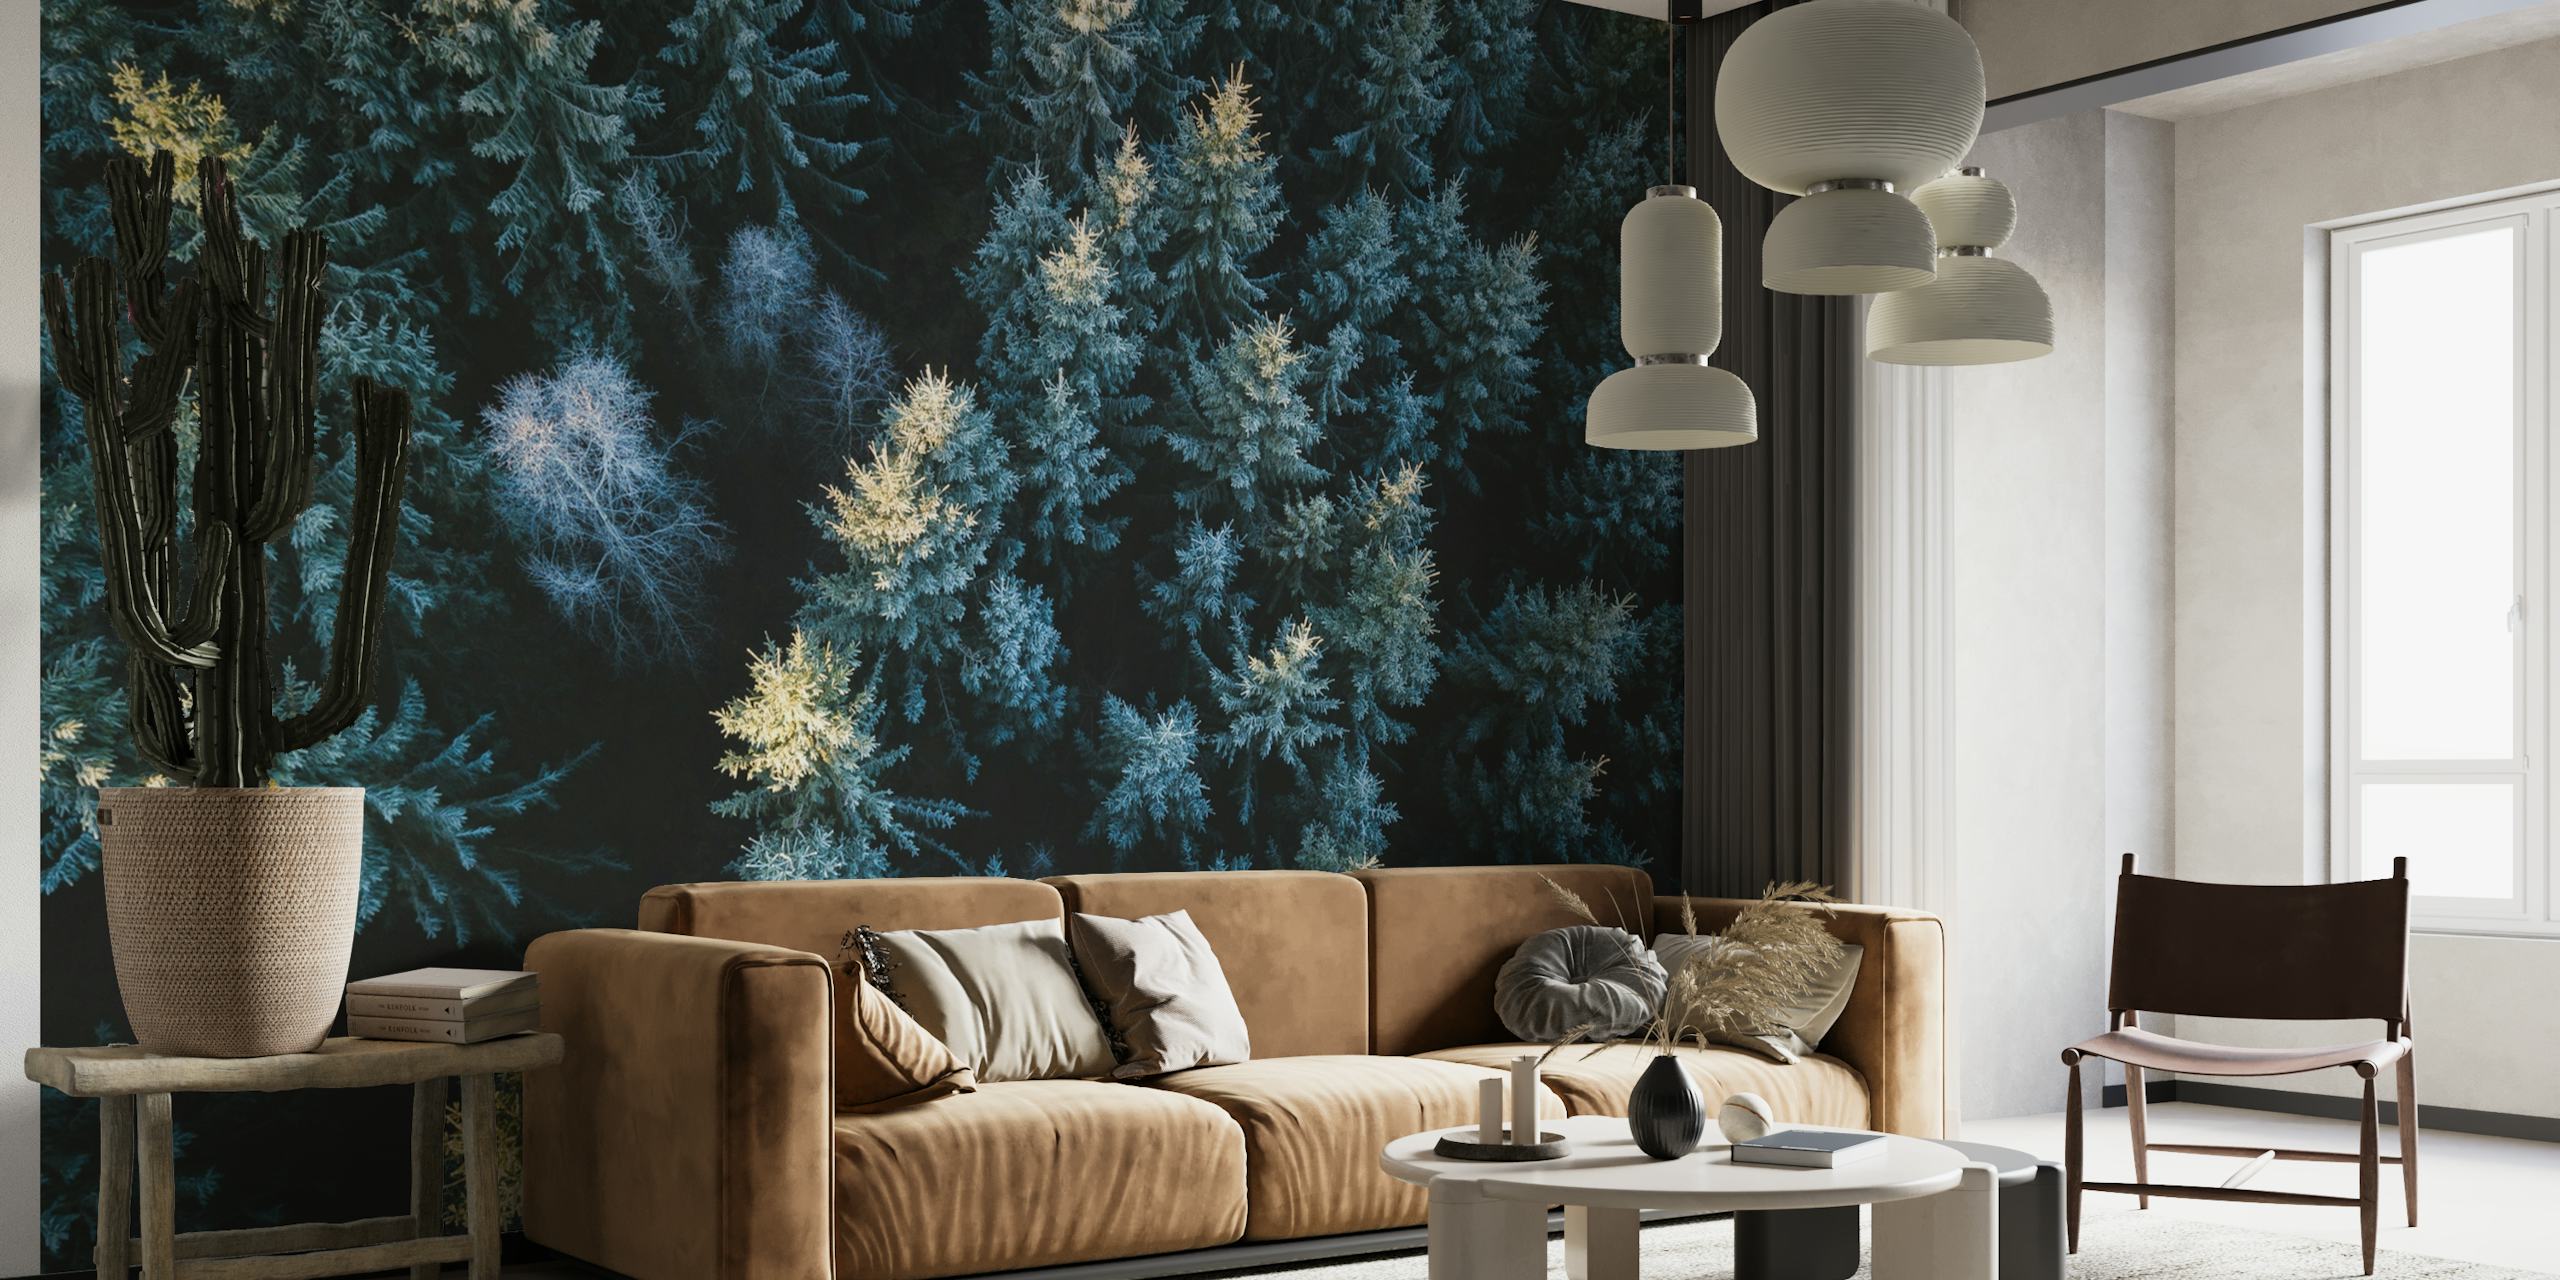 Wall mural of forest treetops with dense green foliage